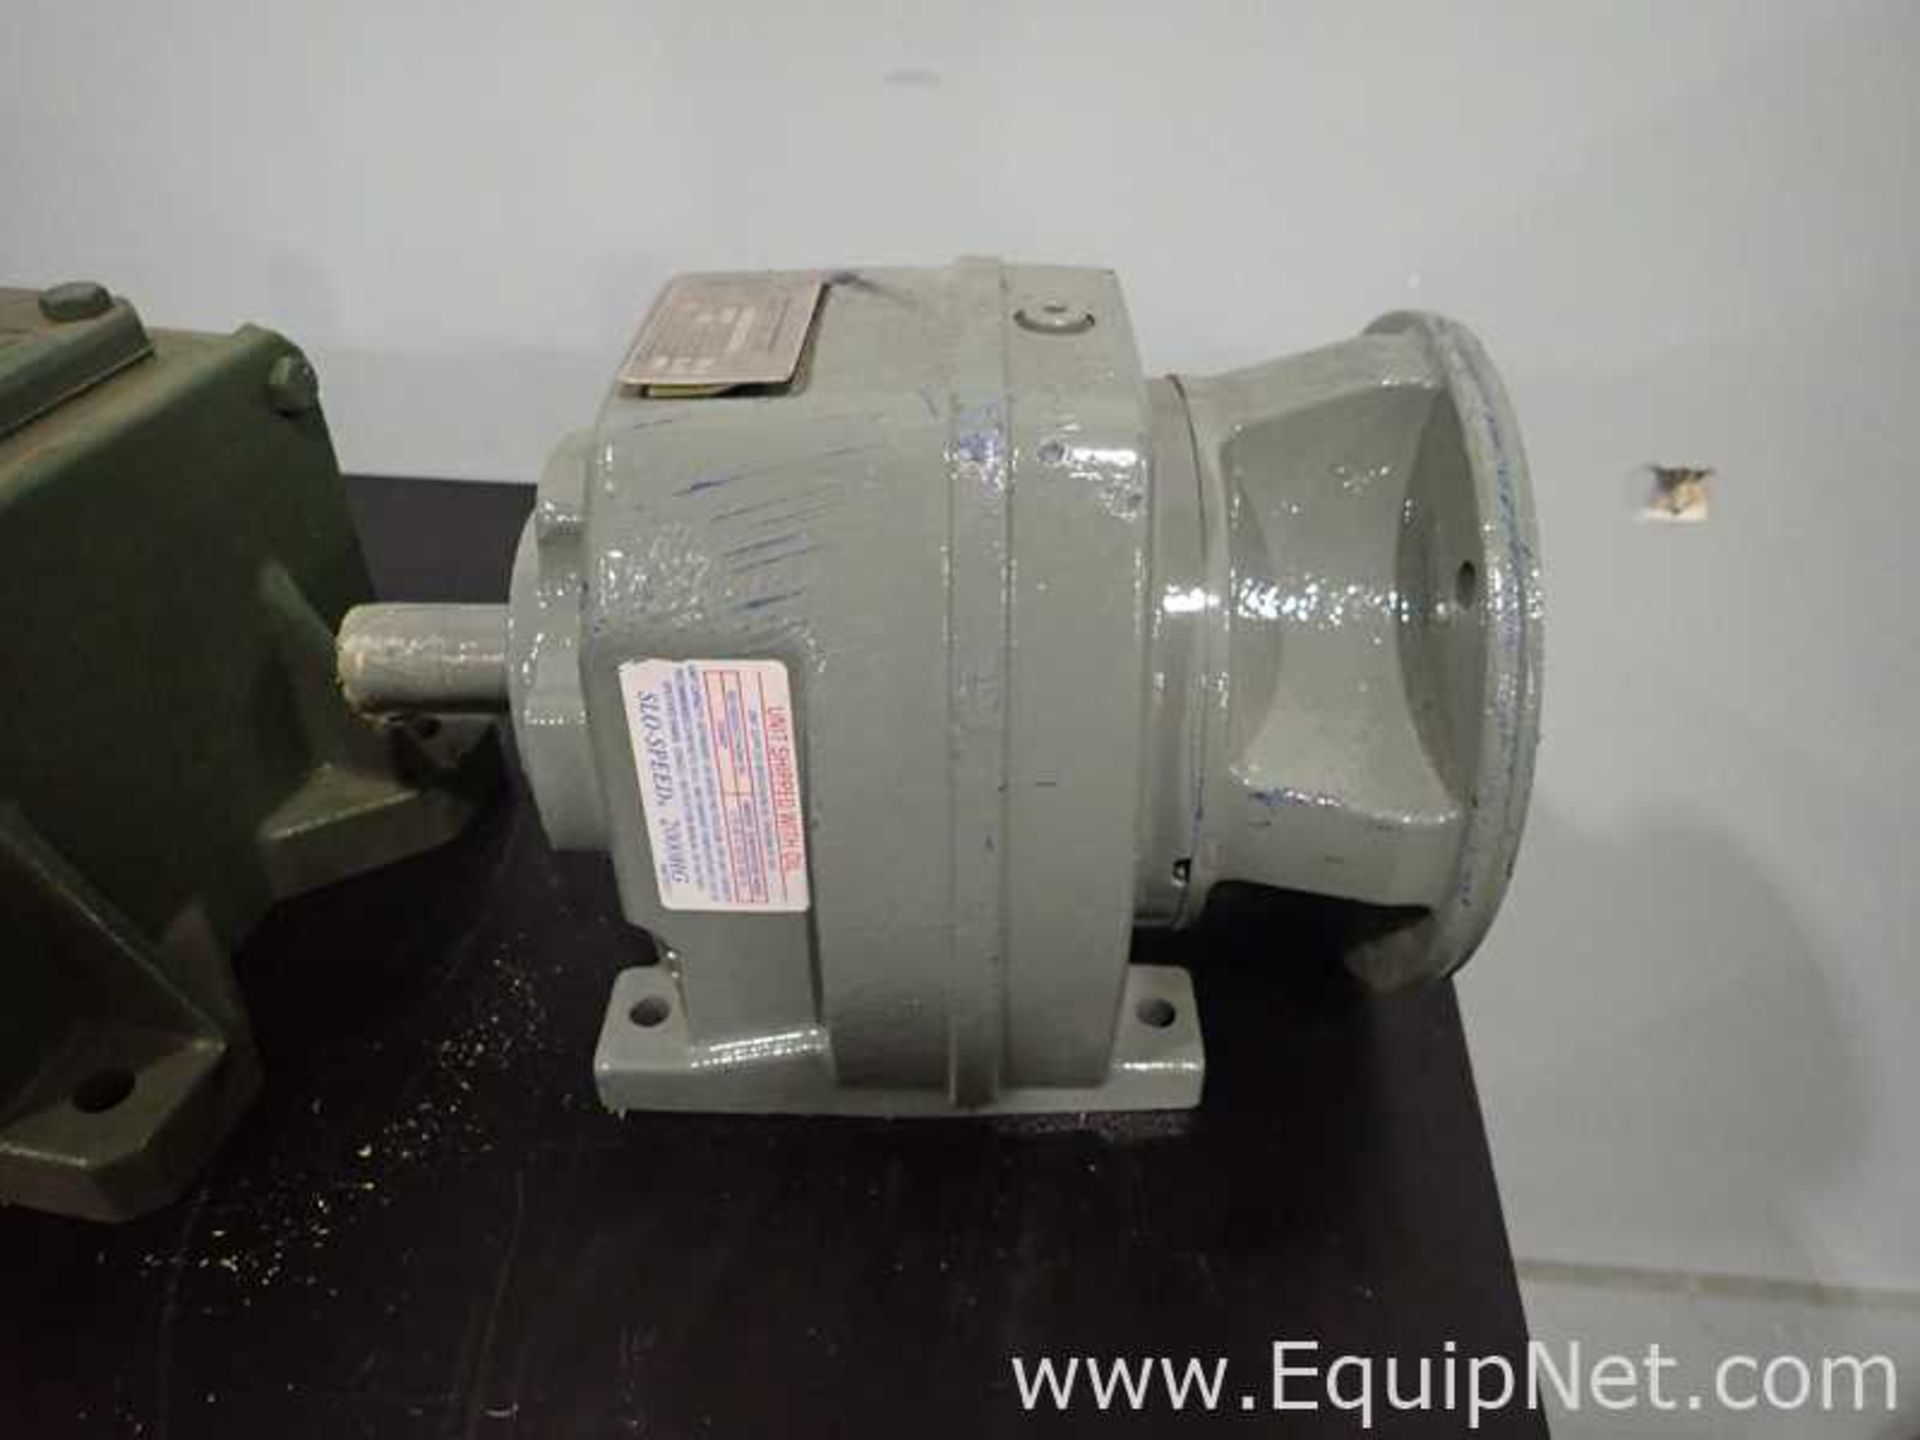 EQUIPNET LISTING #793447; REMOVAL COST: $25; DESCRIPTION: Lot of 6 Various Gear BoxesLot - Image 8 of 13